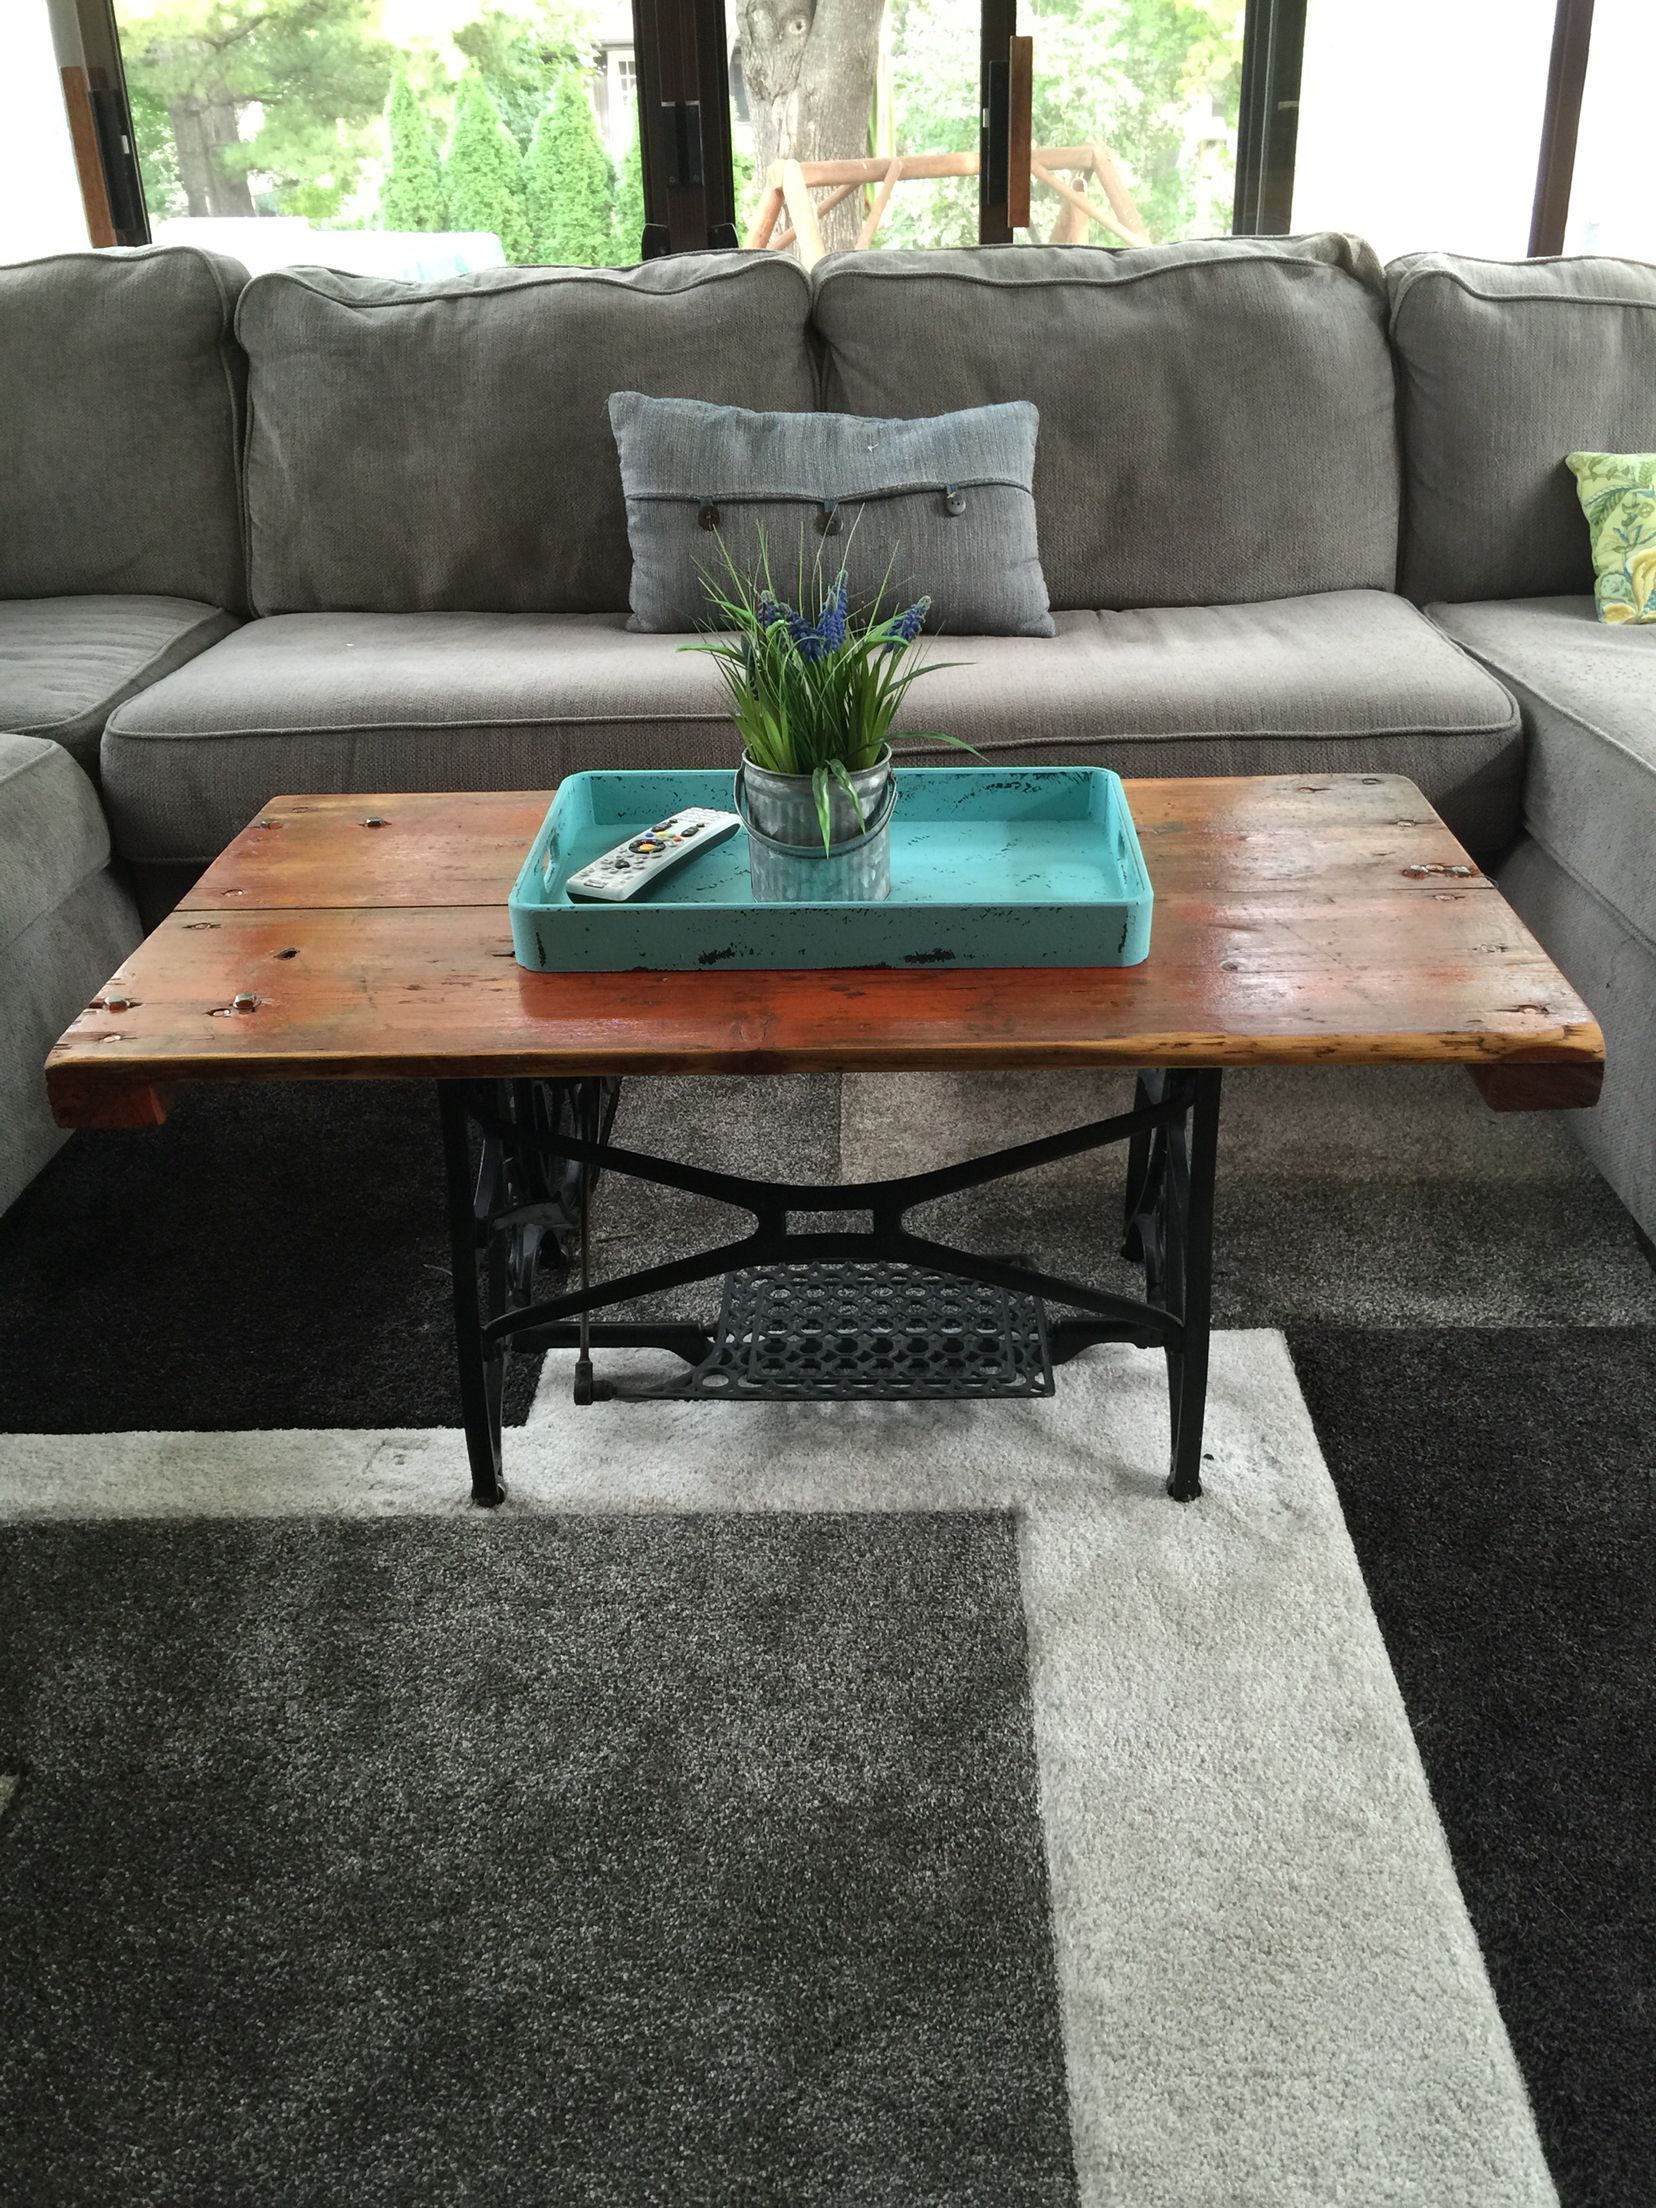 Coffee Table Made From Barn Door And Antique Sewing Machine Base Inside Coffee Tables With Storage And Barn Doors (Gallery 9 of 20)